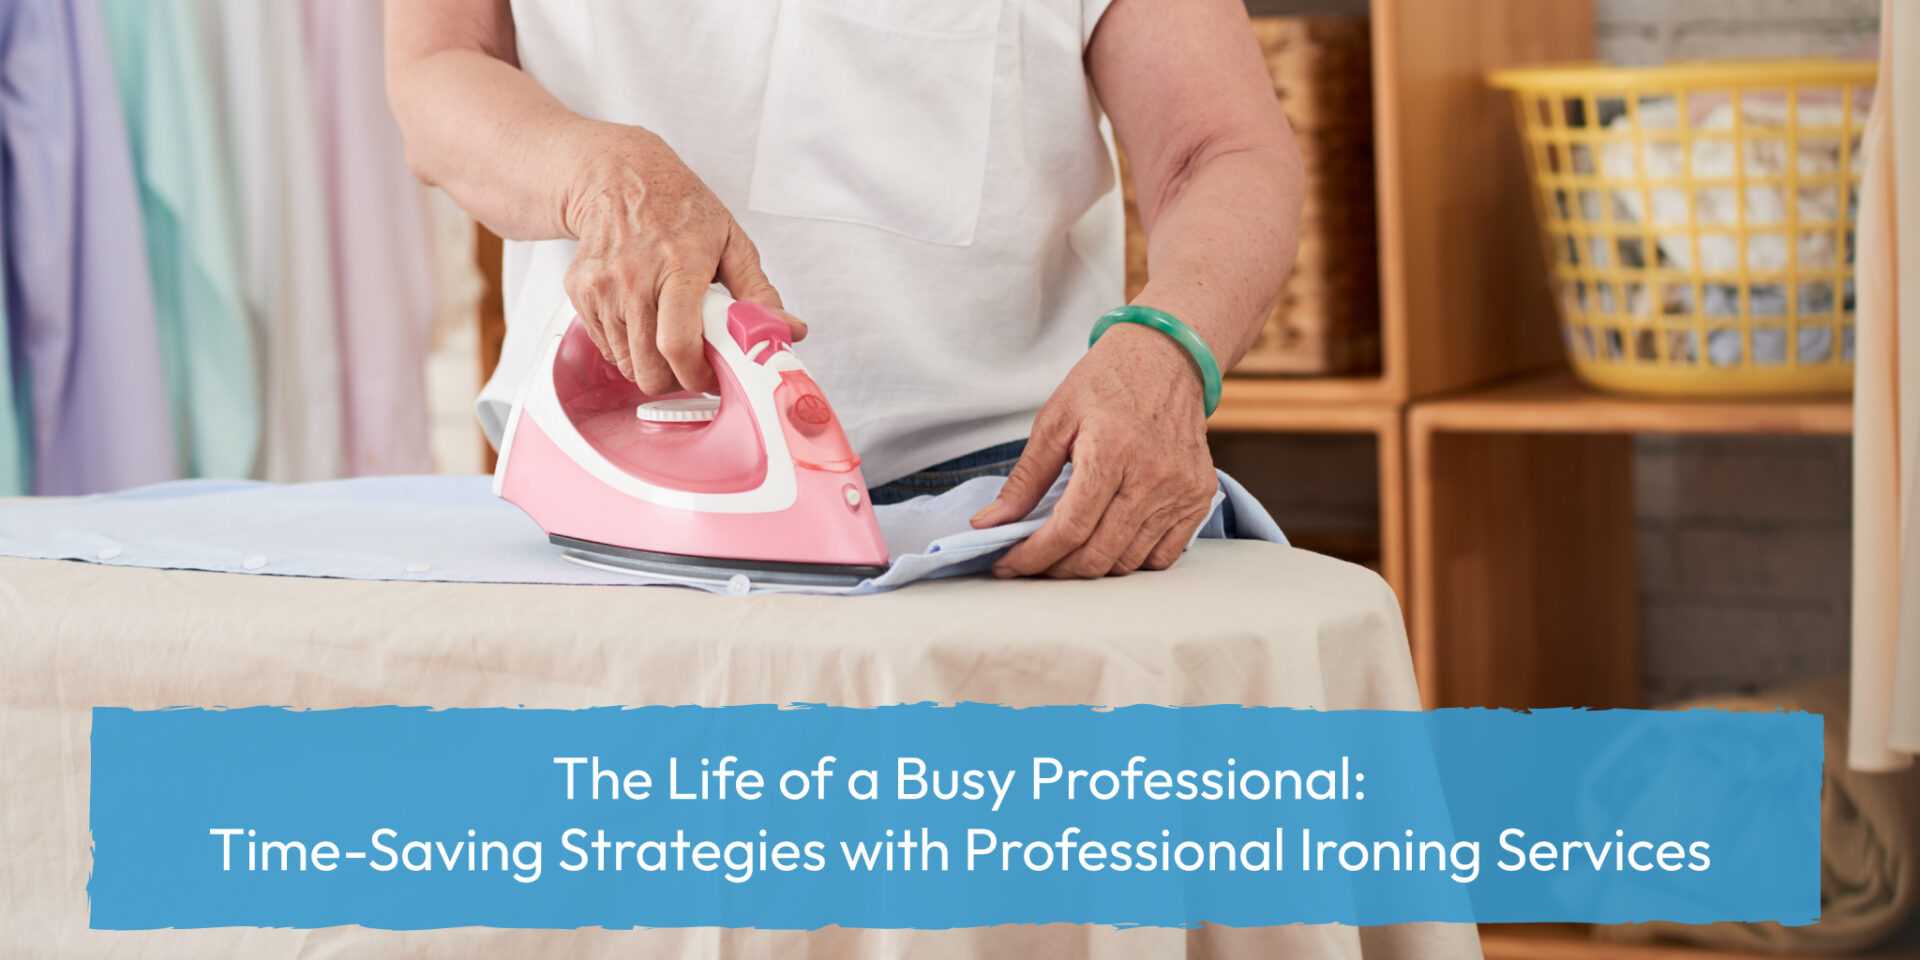 The Life of a Busy Professional: Time-Saving Strategies with Professional Ironing Services